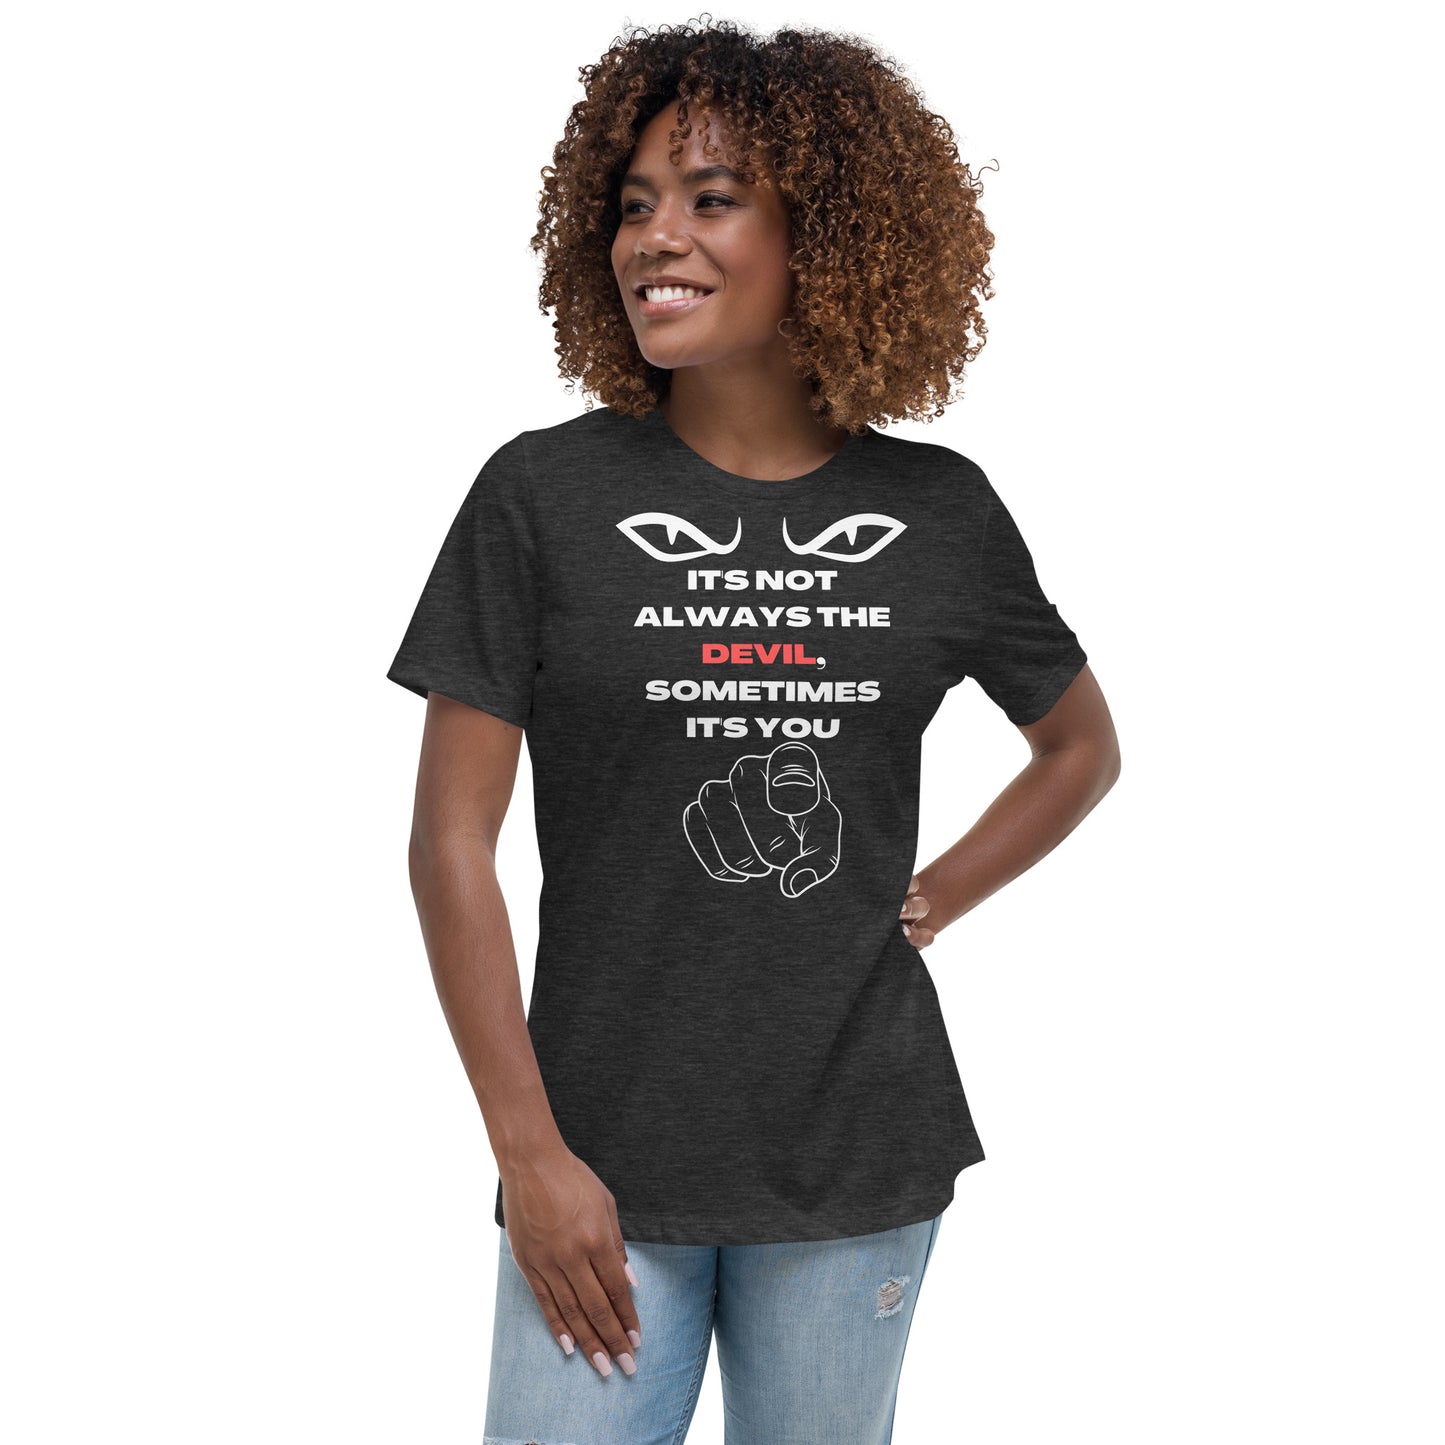 IT'S NOT THE DEVIL WOMEN'S RELAXED T-SHIRT